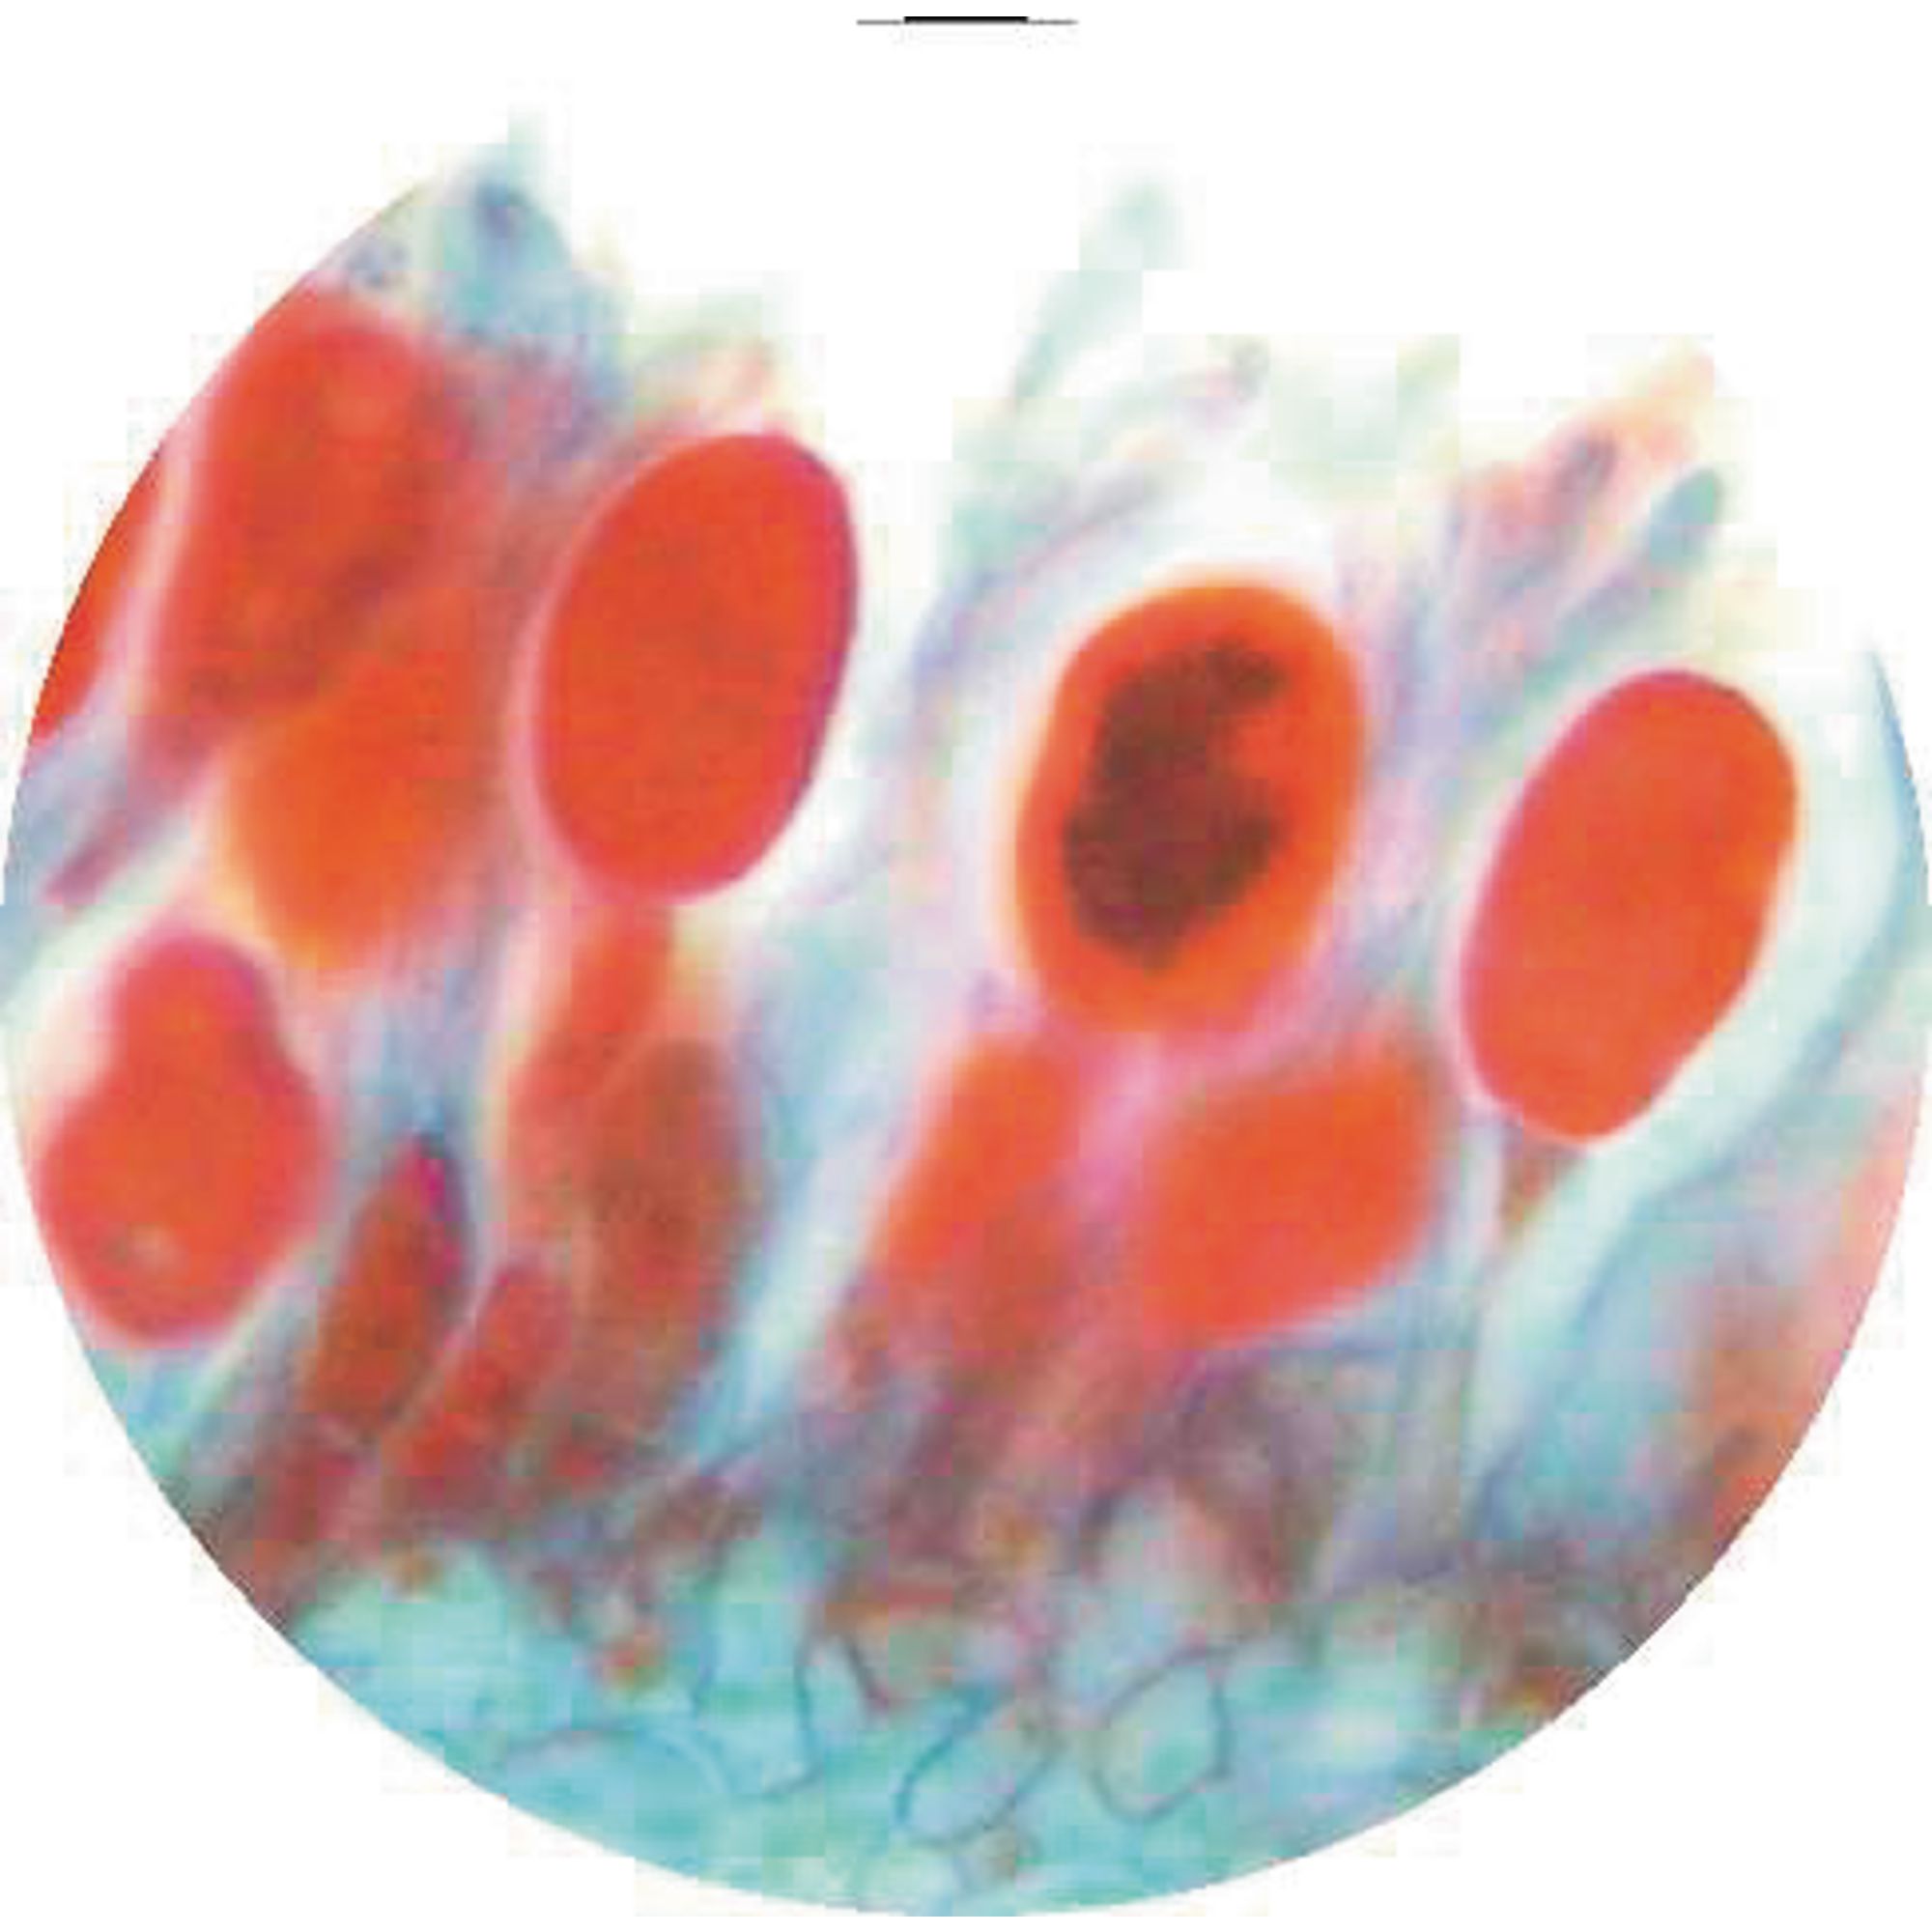 Puccinia T.s. Host With Uredospores